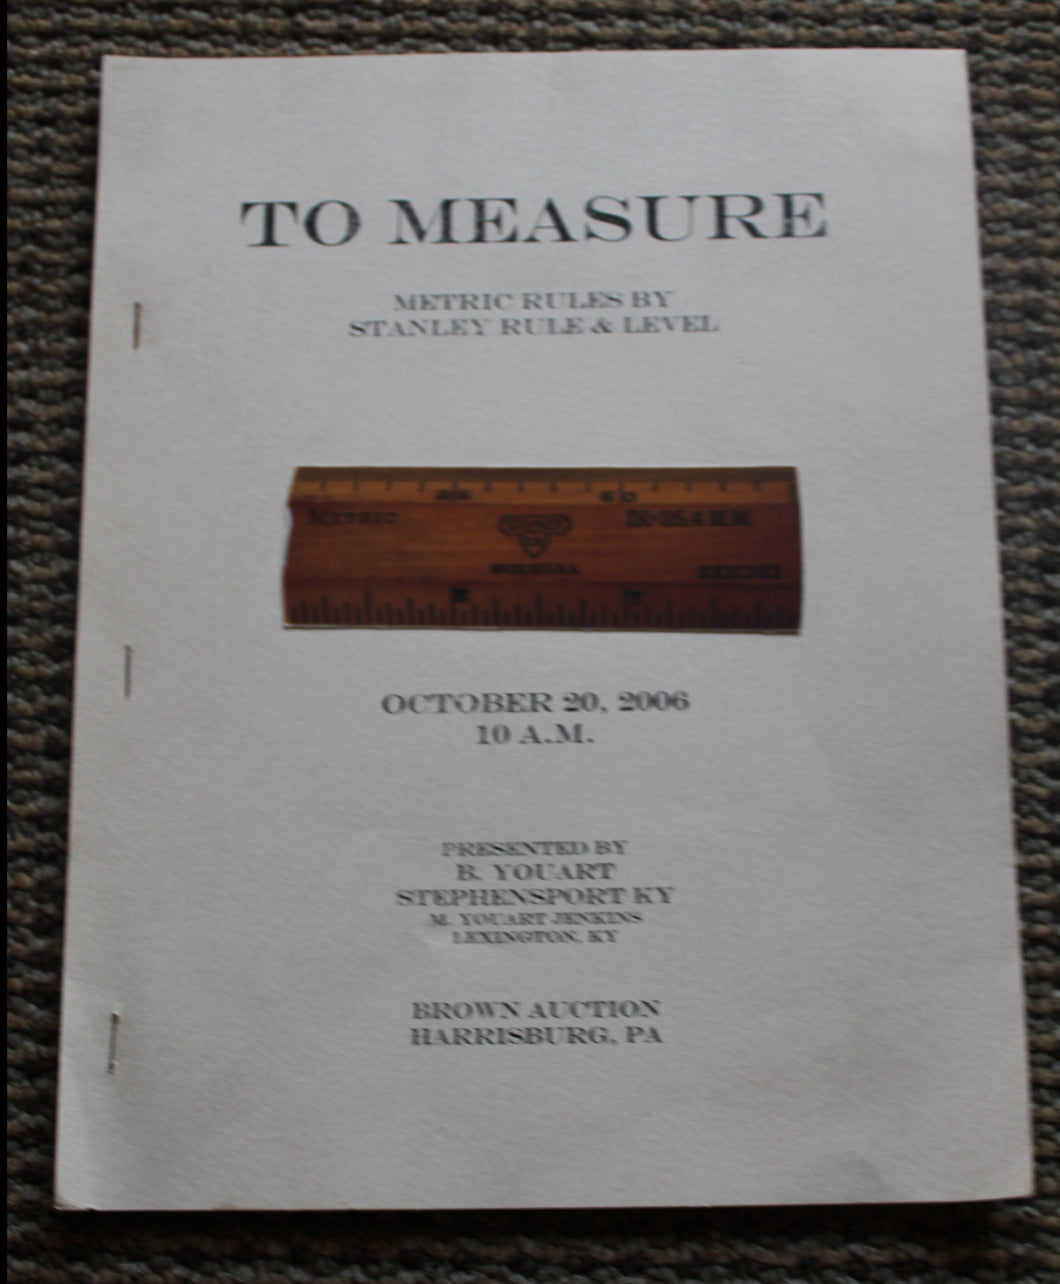 To Measure Metric Rules by Stanley Rule & Level - Presentation